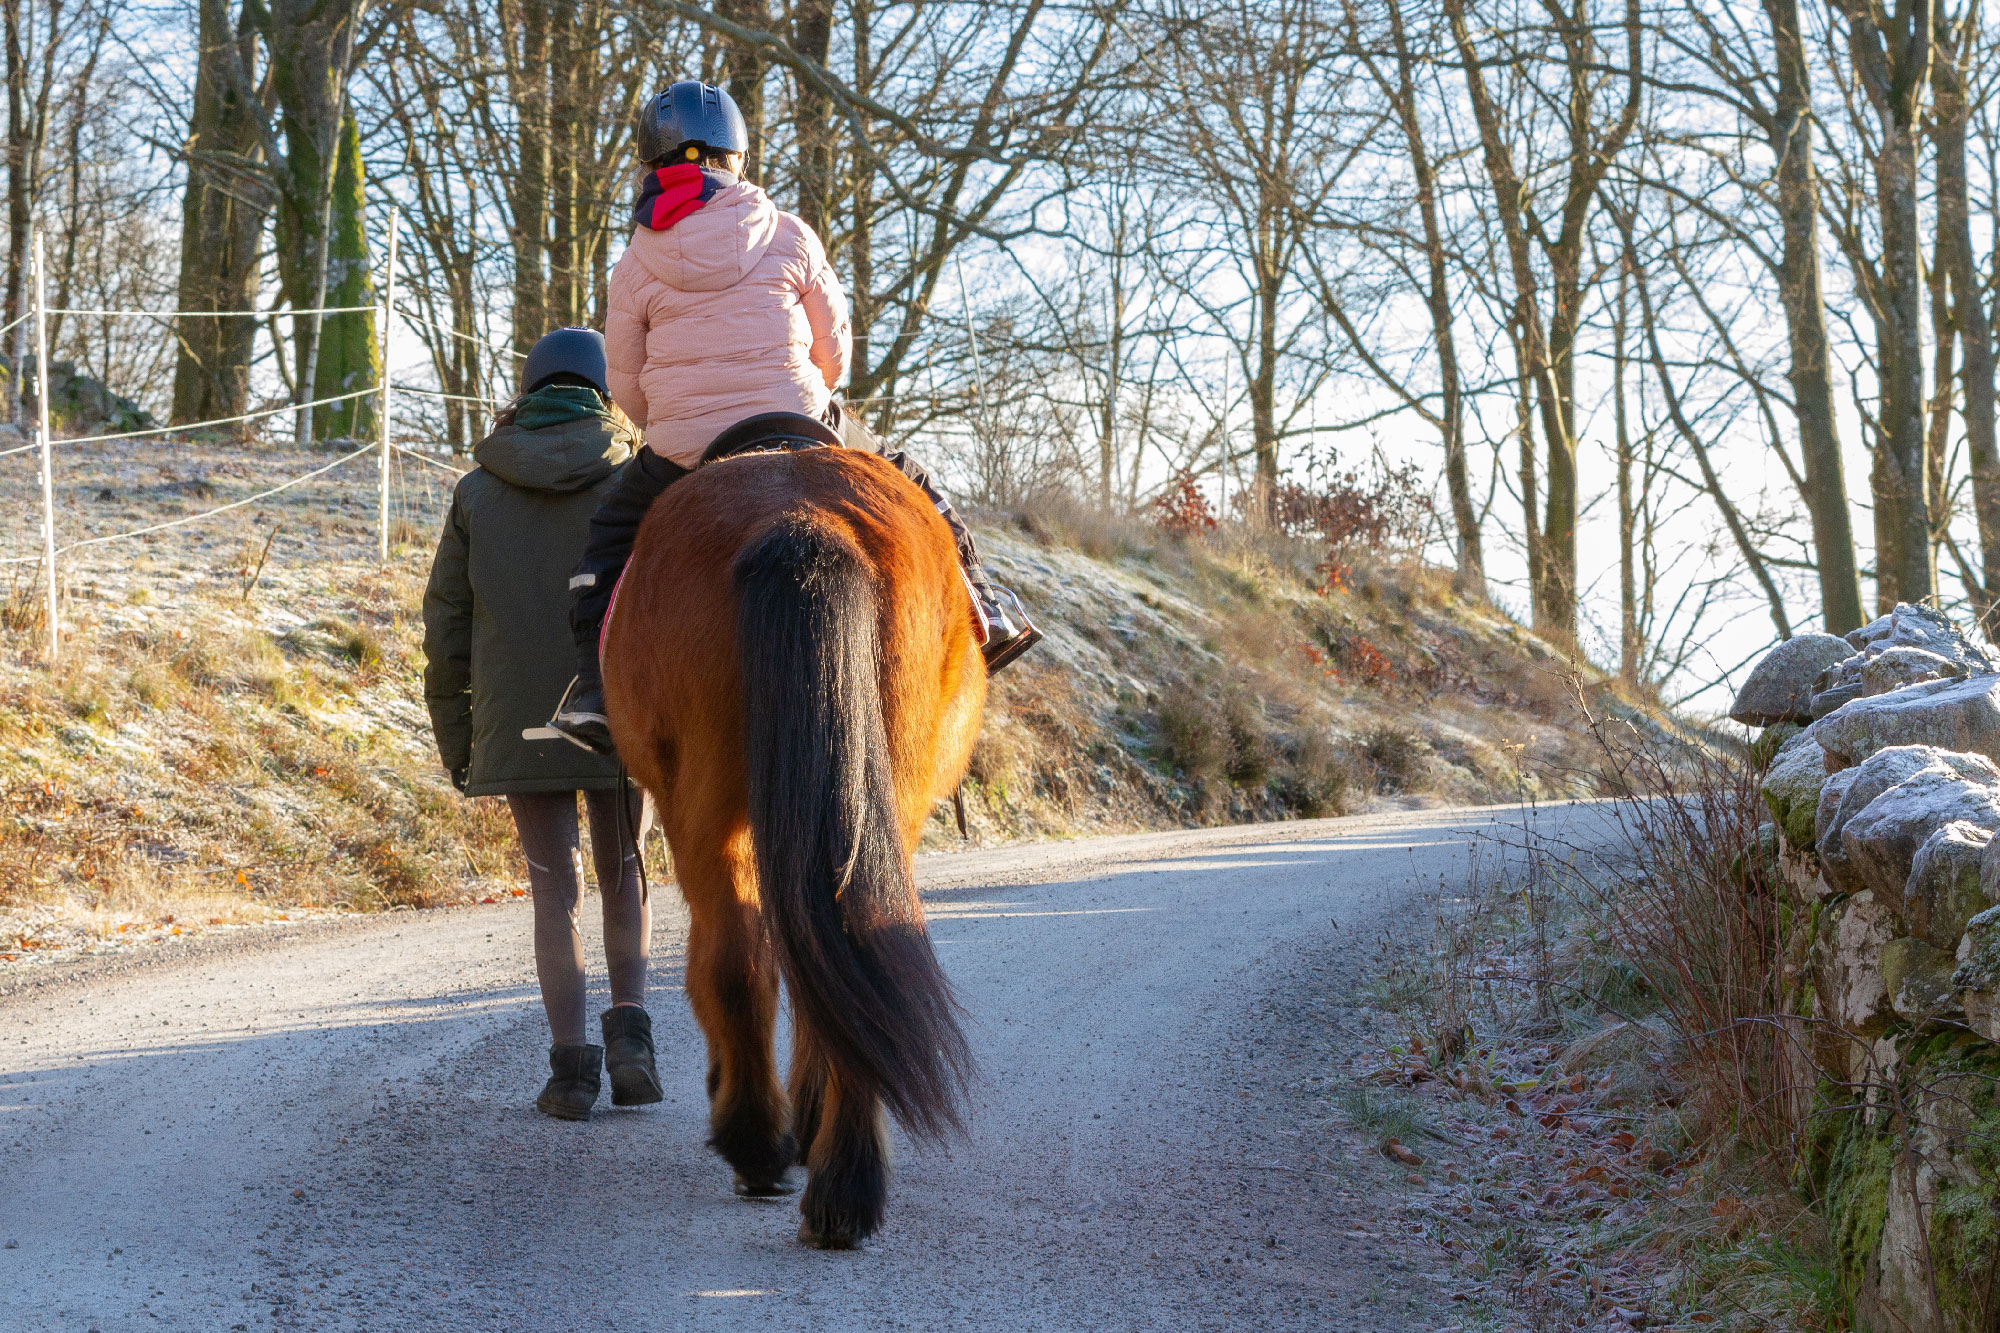 riding with someone leading the horse is one of the best ways to overcome fear after falling from a horse.